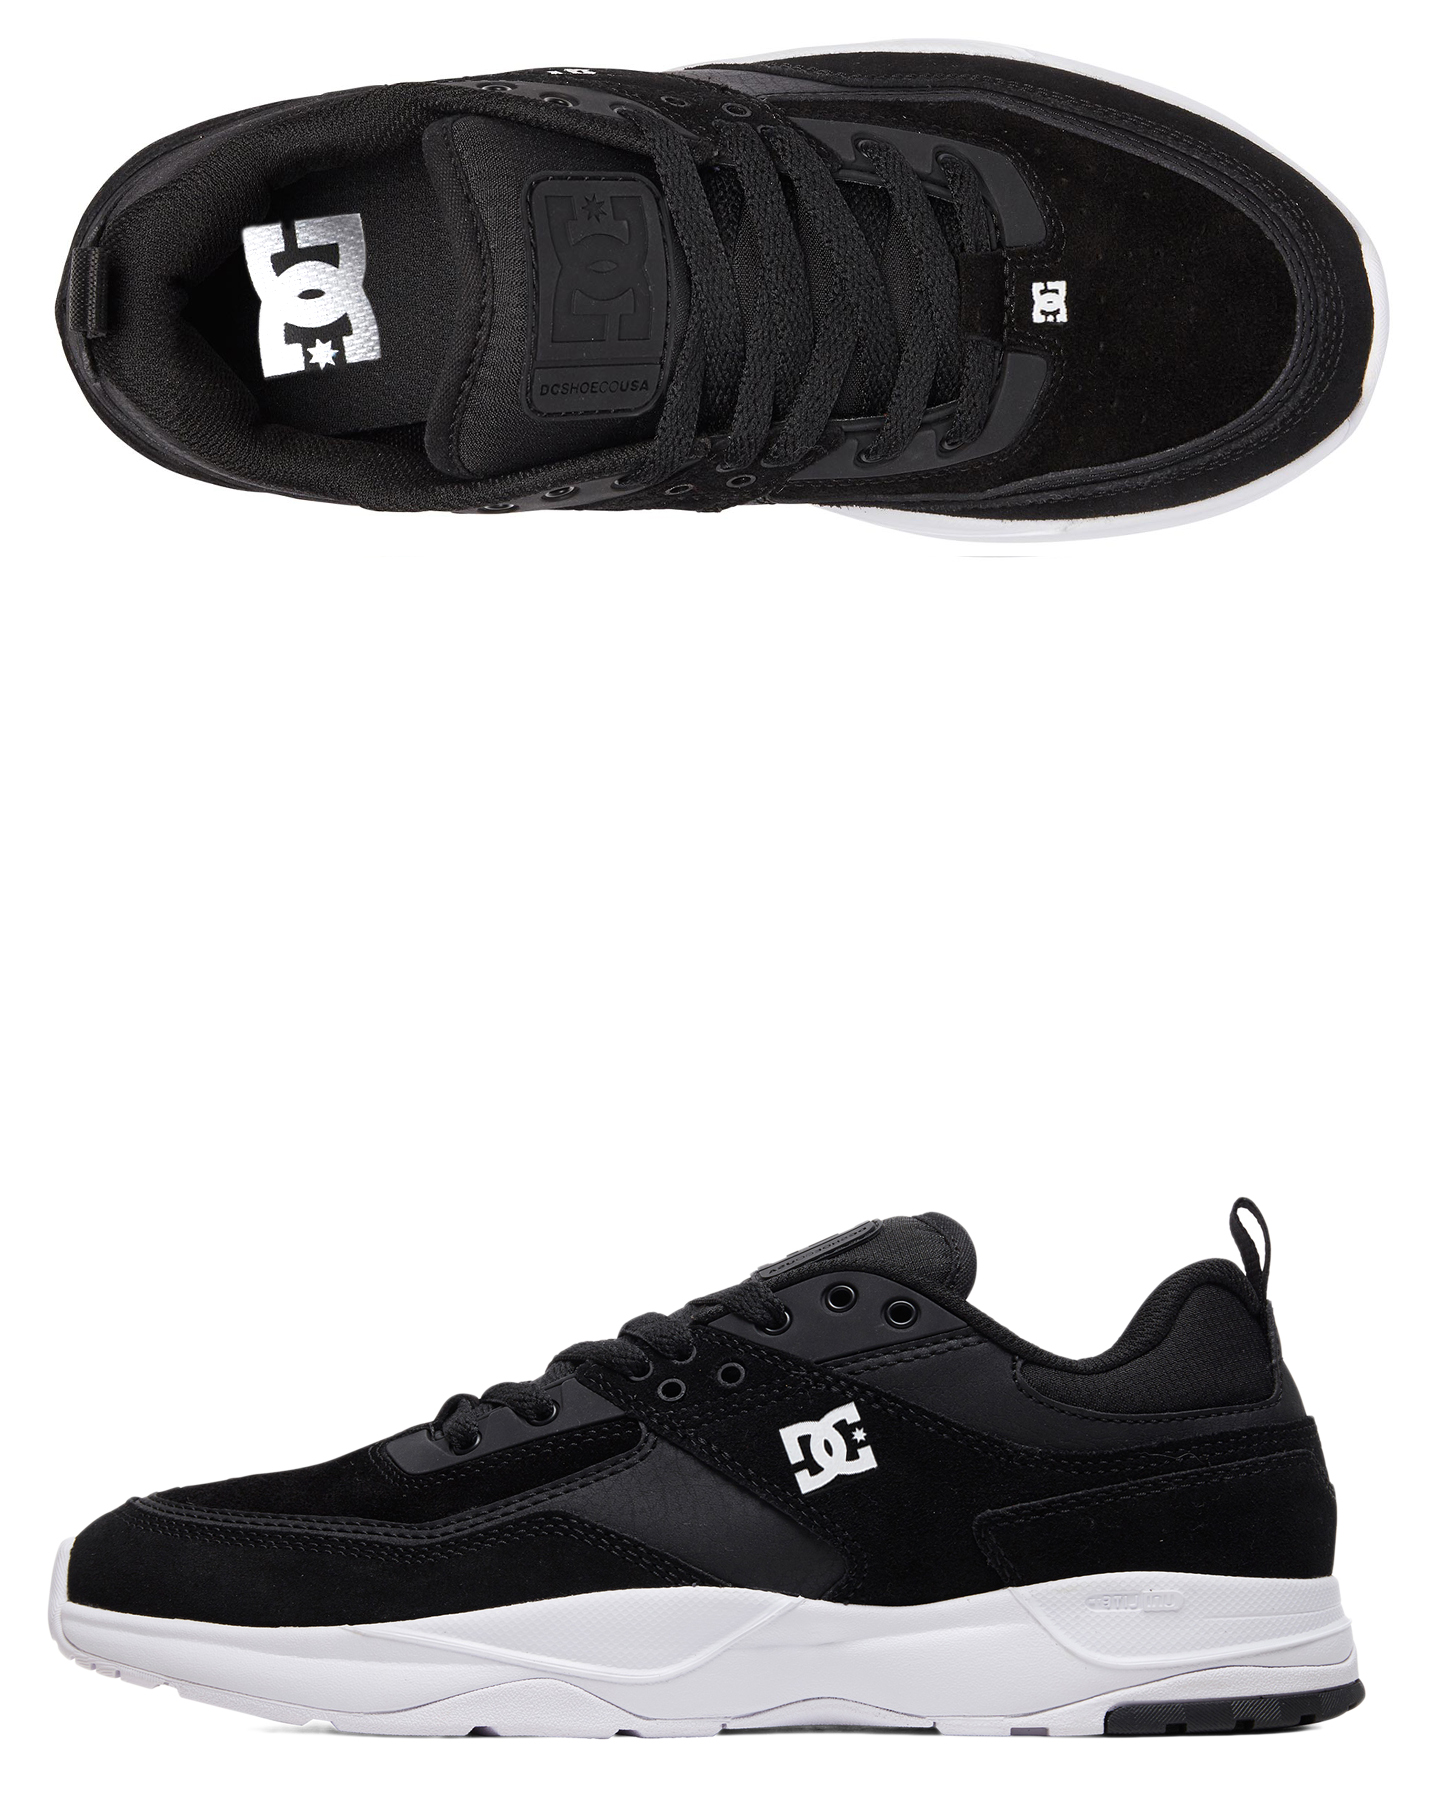 white and black dc shoes